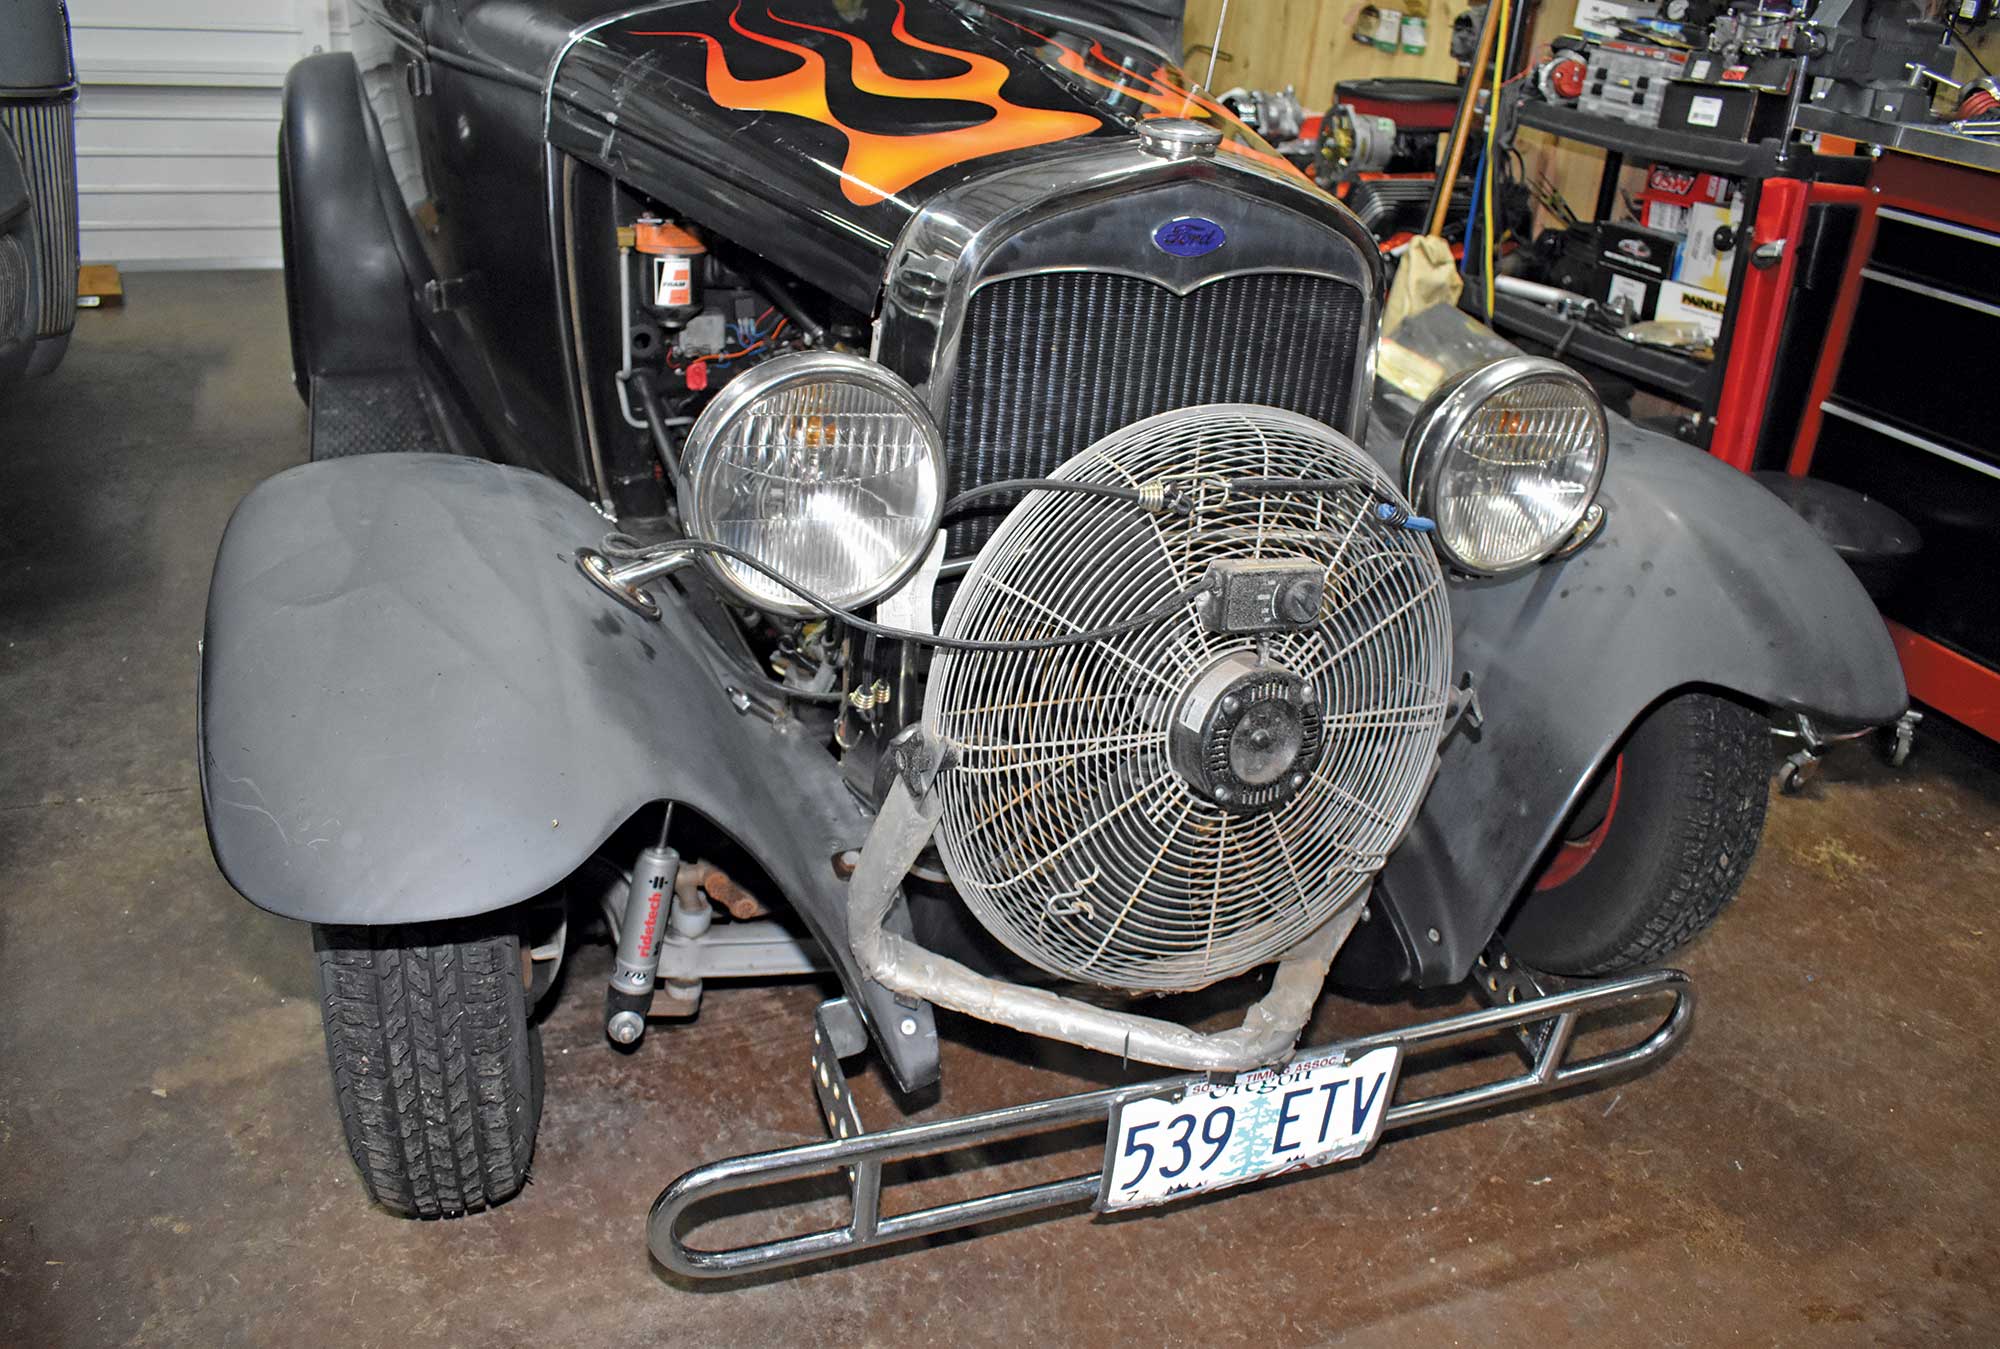 a large, effective fan displayed on a car in a garage